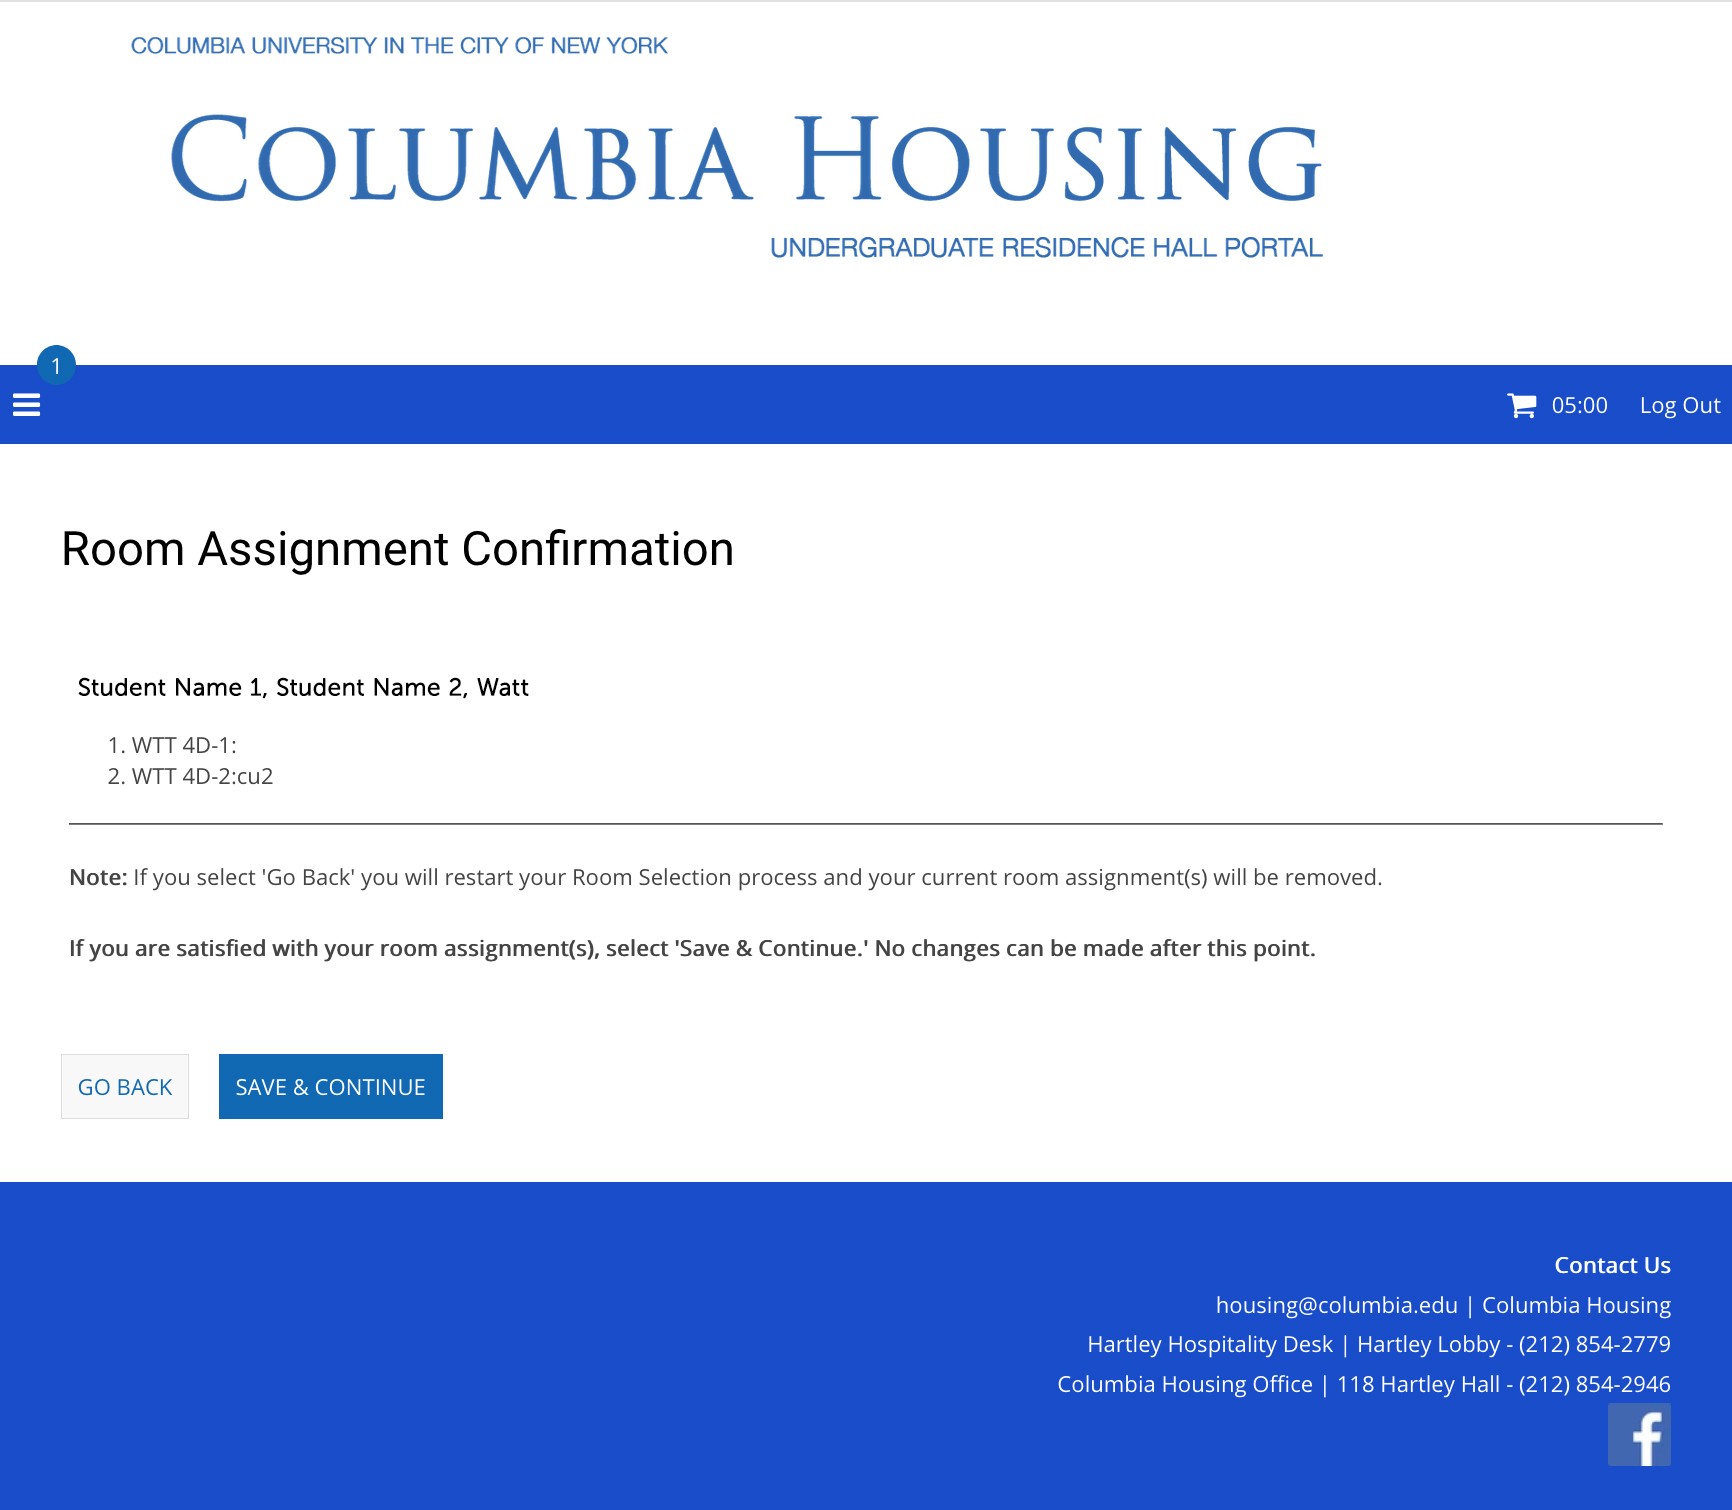 Step 4: Room Assignment Confirmation (Group Example)